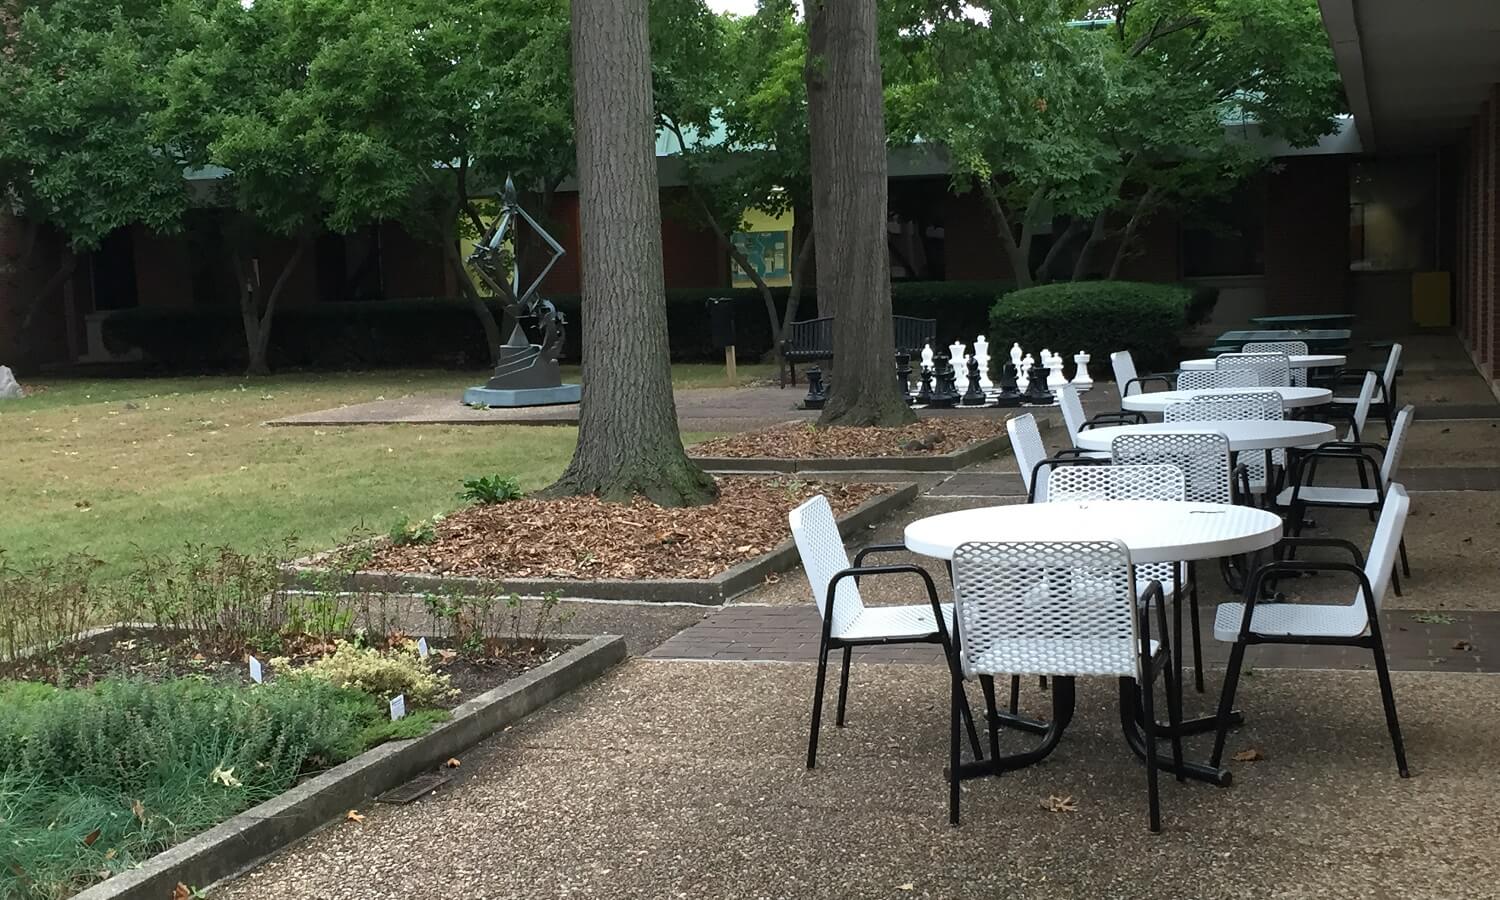 Outdoor courtyard with trees, plants, benches and tables with chairs. 